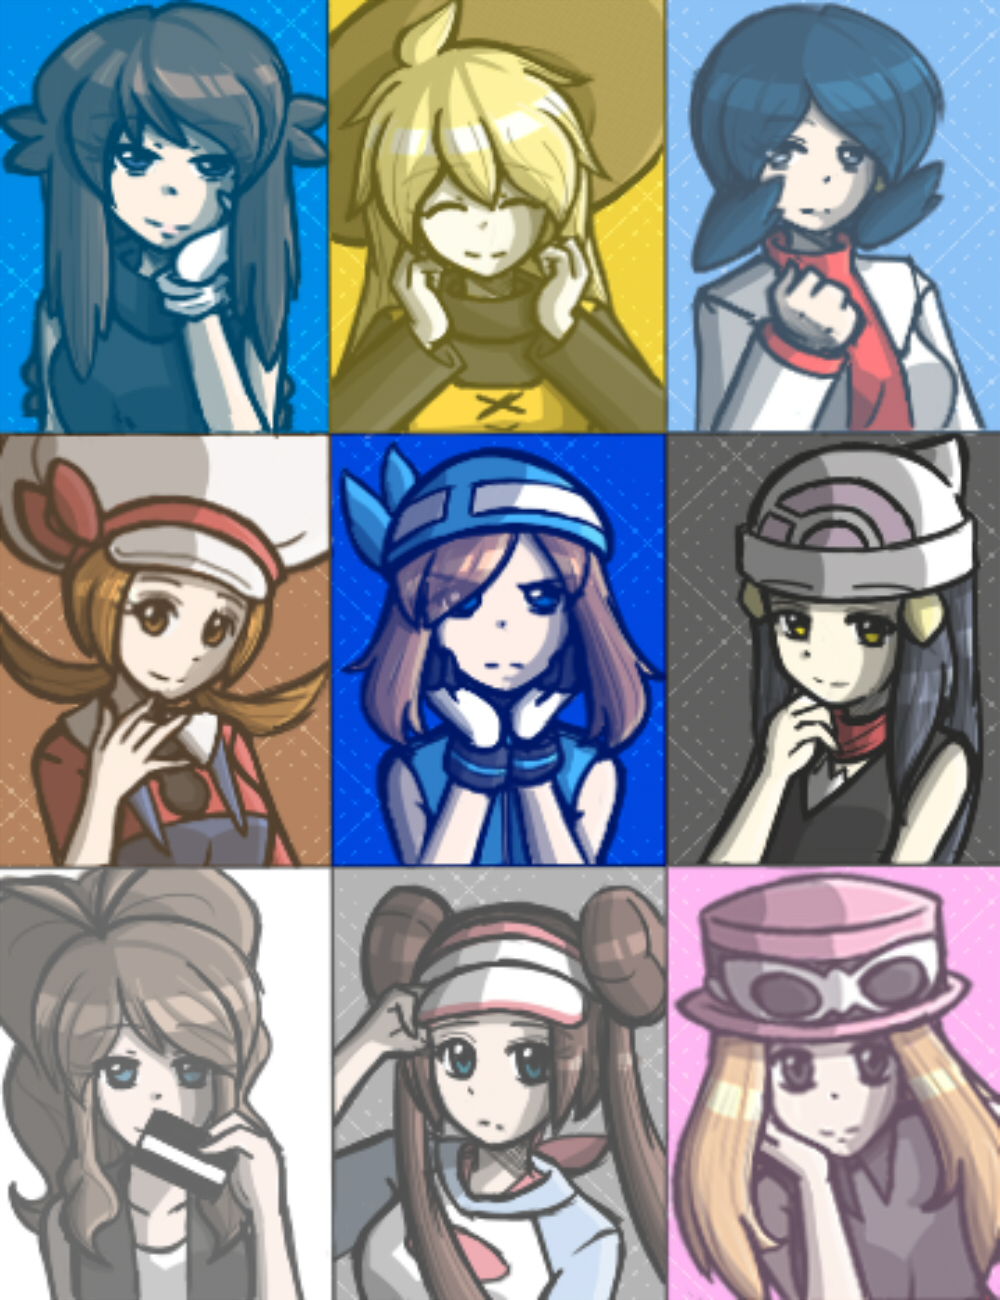 The Pokespe Girls by LilithShiro